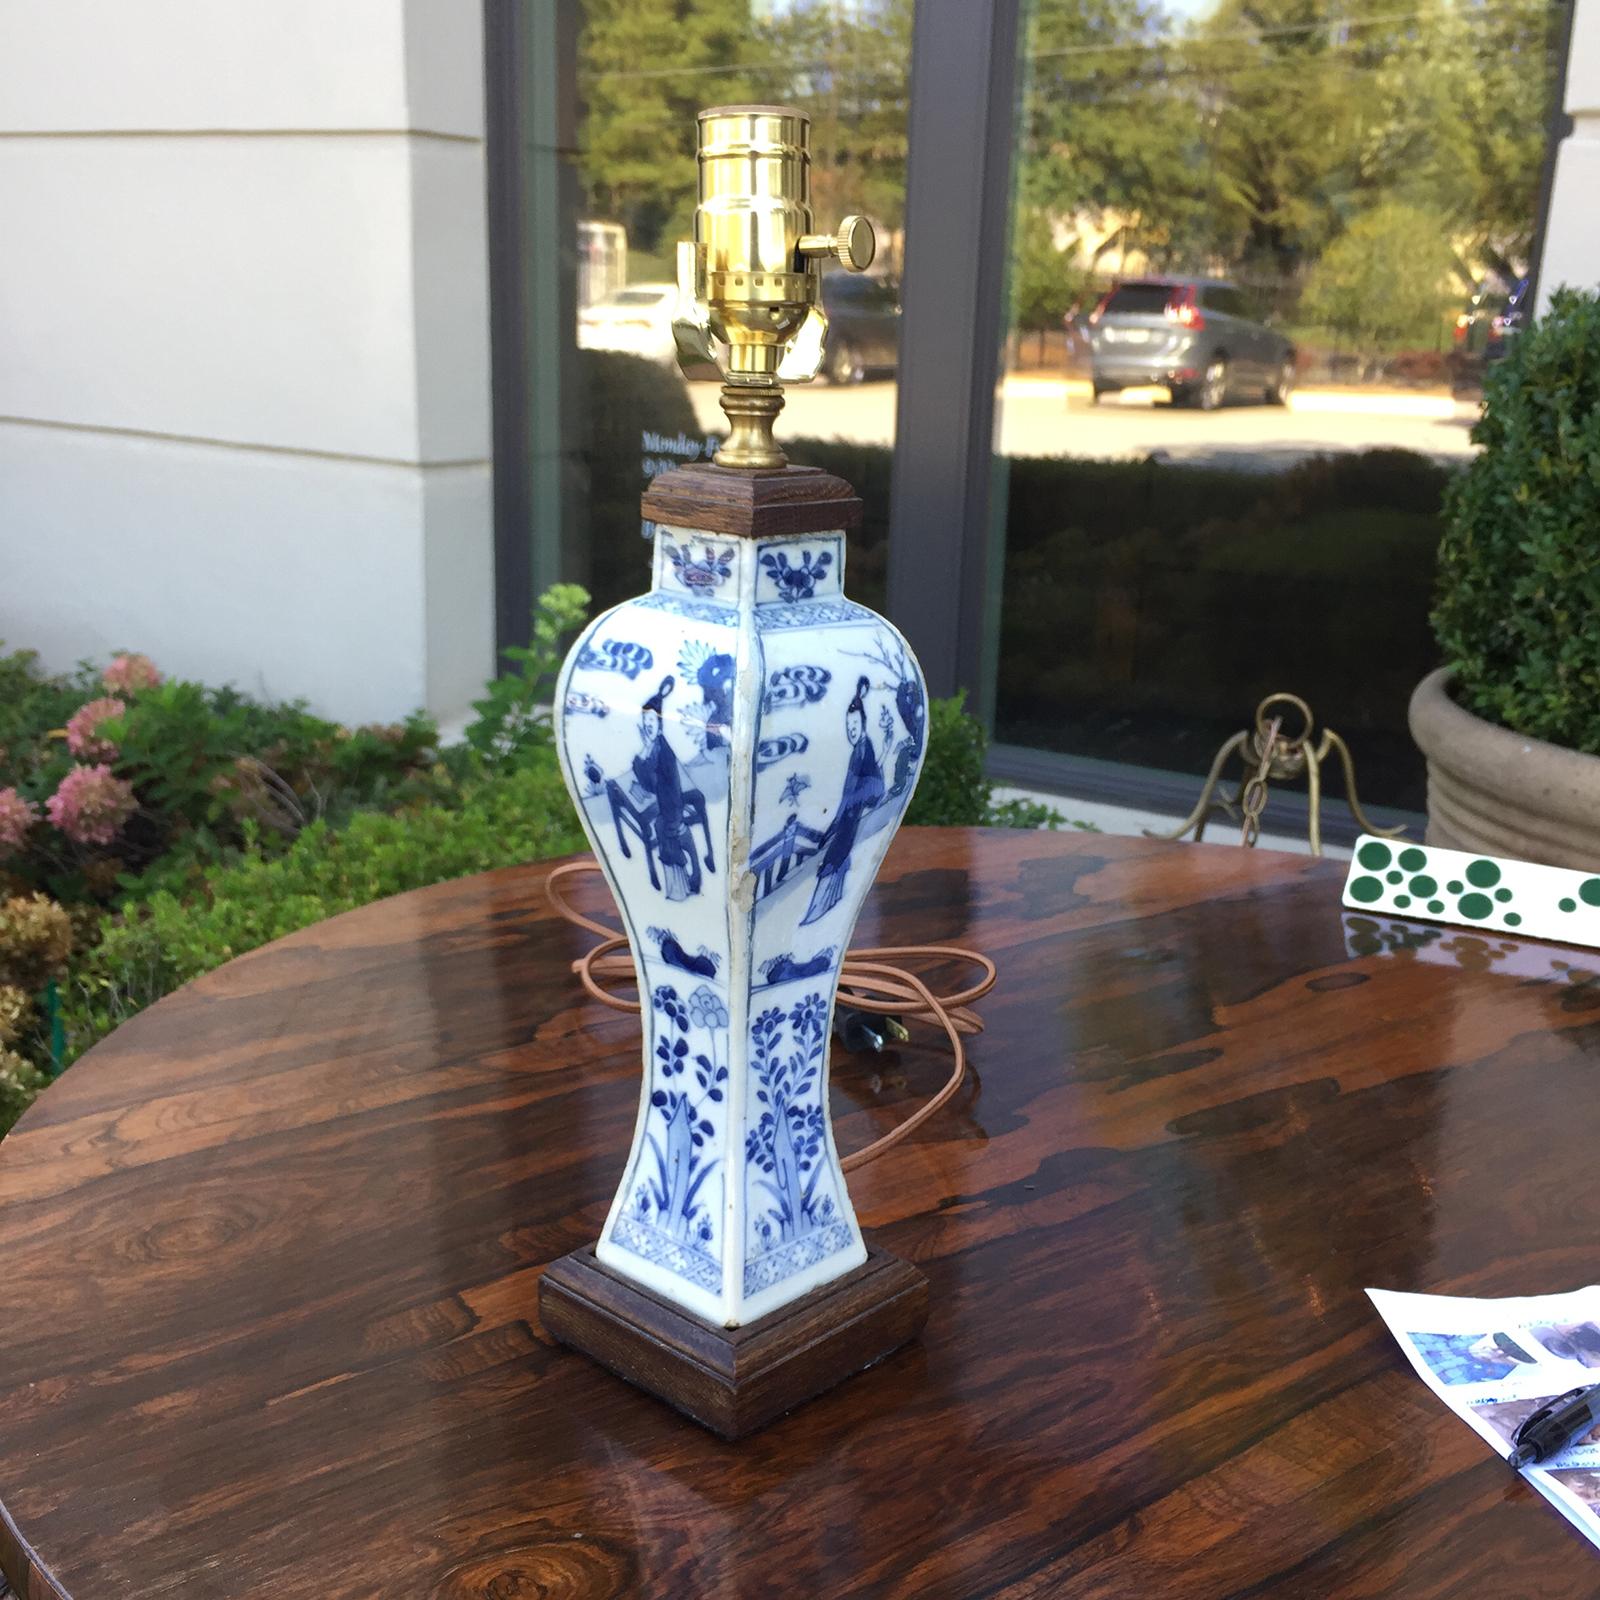 18th-19th century Chinese blue & white porcelain vase as lamp
Wood cap & base
New wiring.